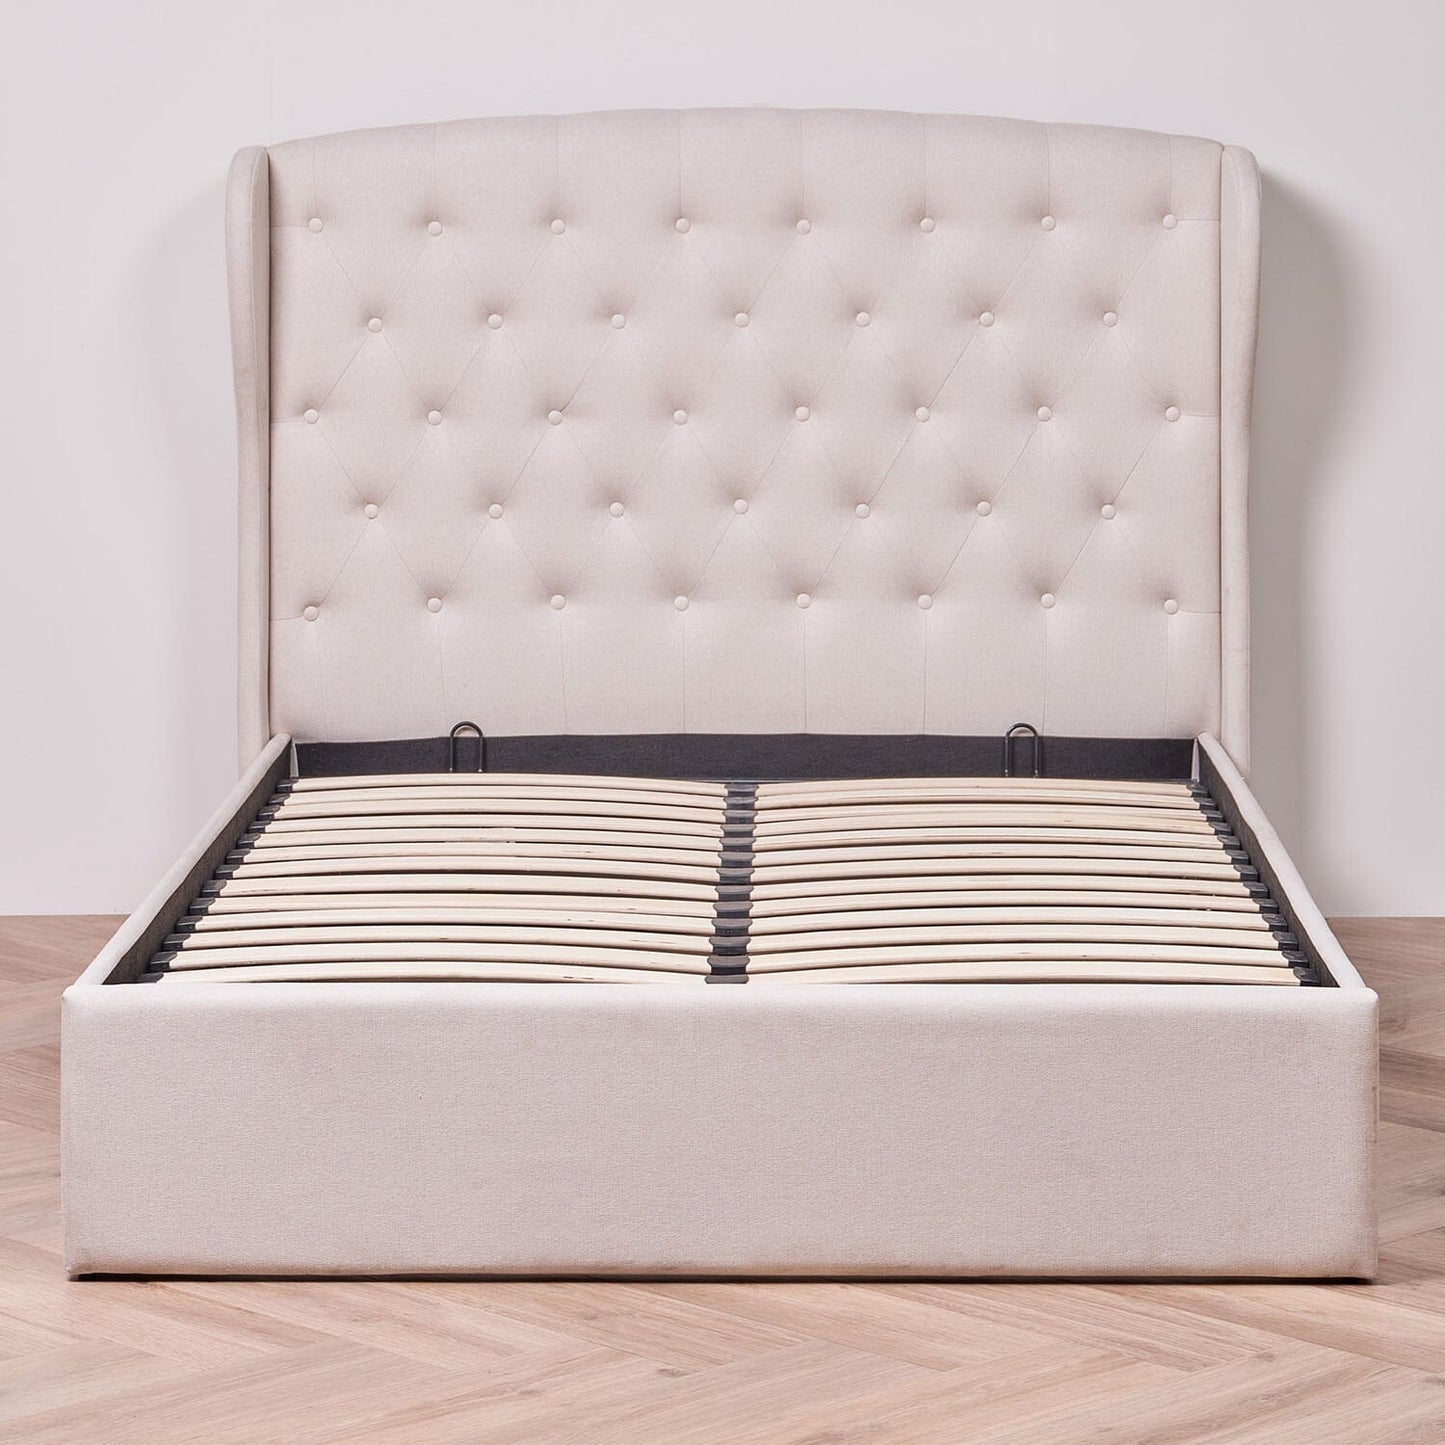 Daisy double ottoman storage bed  - Laura James